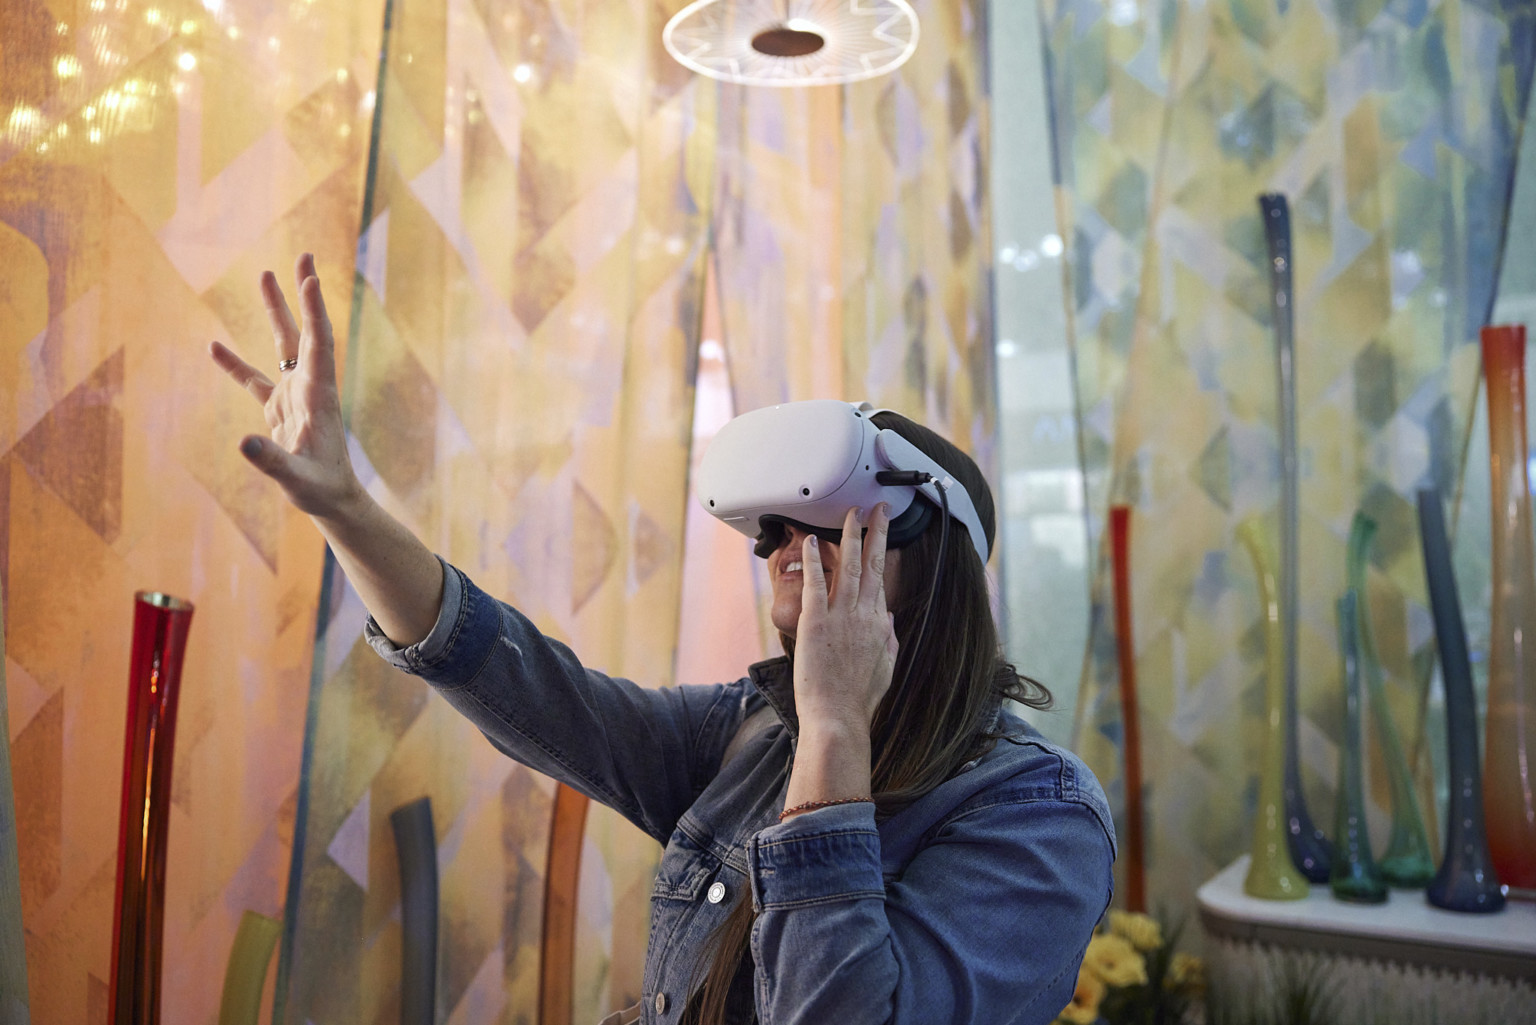 Woman using VR headset reaches out in room with geometric triangular patterned curtains in warm cool tone gradient. Organically shaped vases